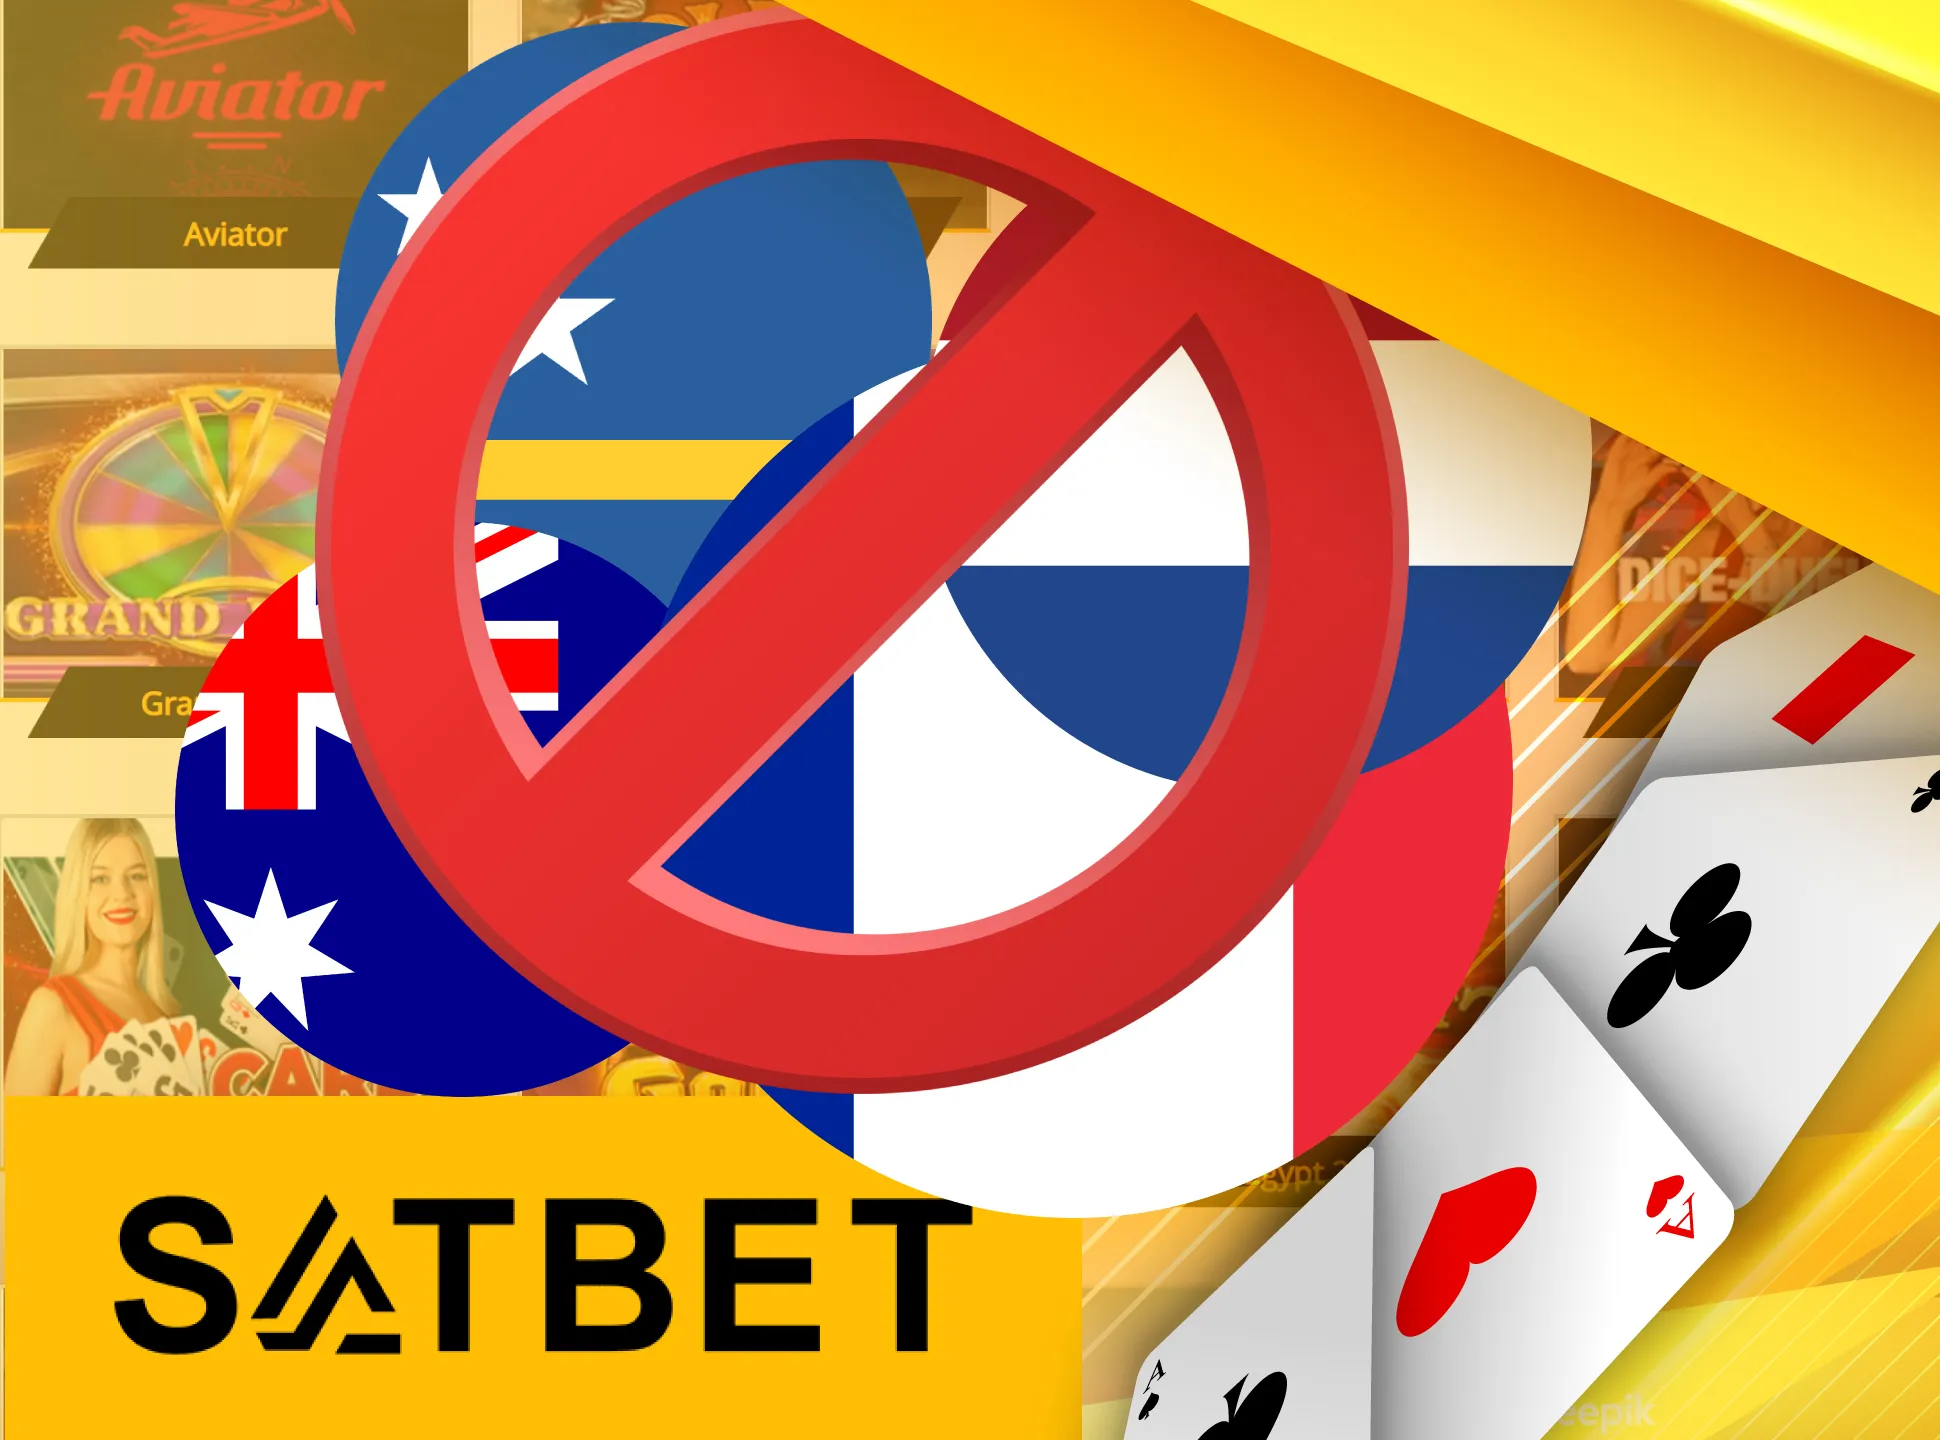 Satbet has excluded countries for making bet from.